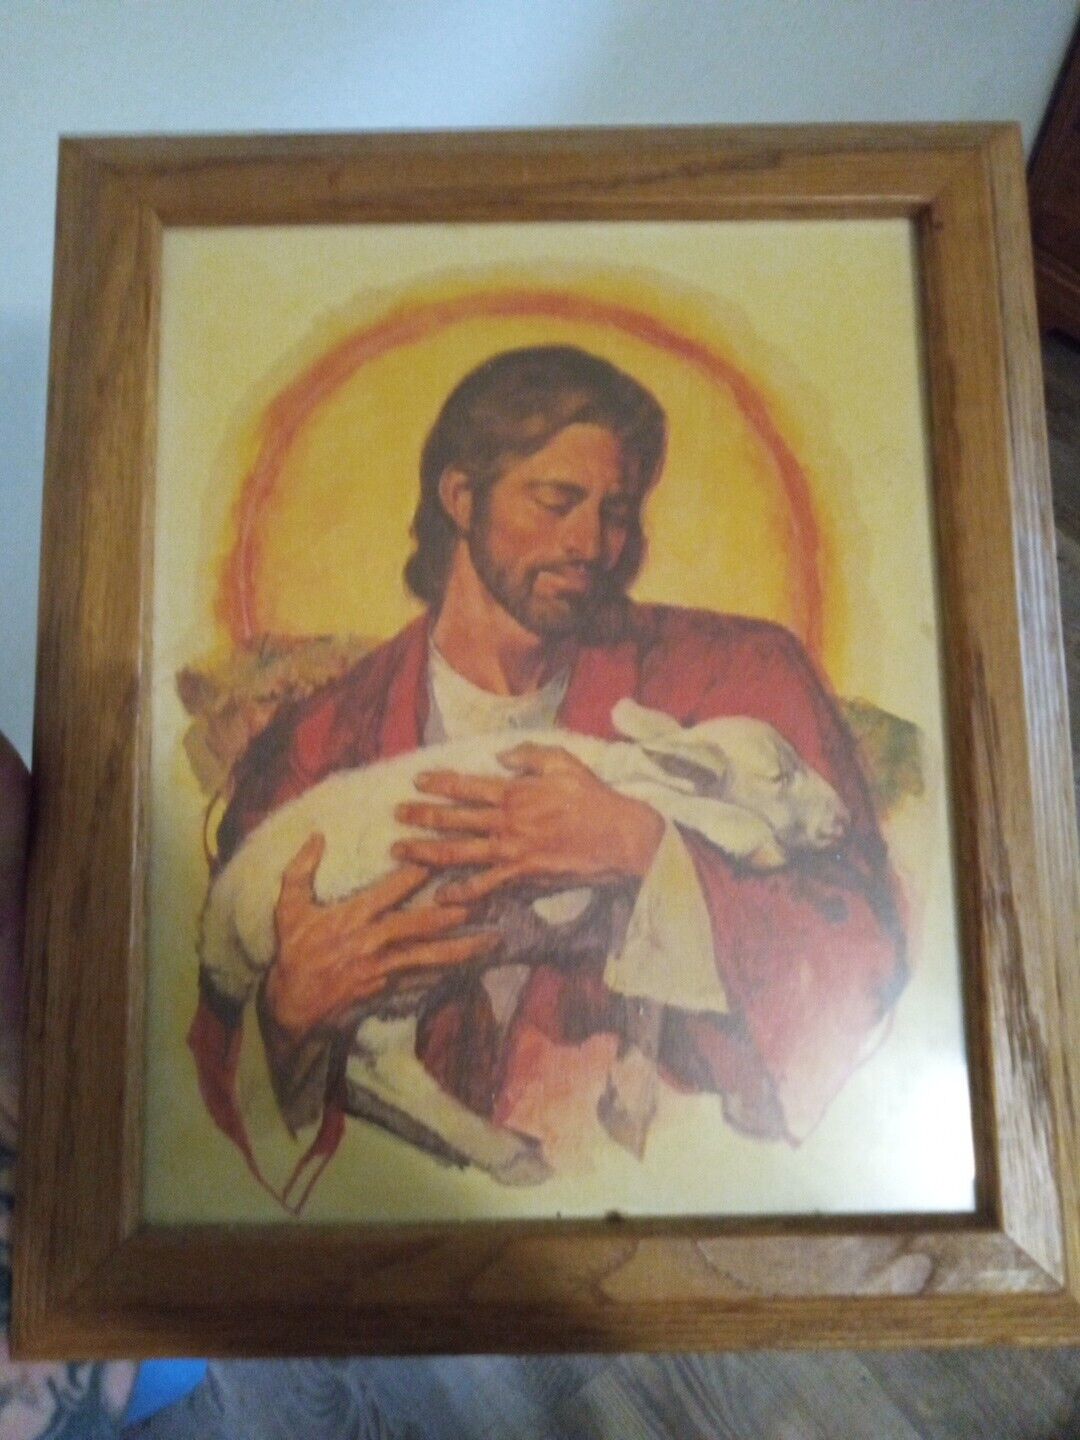 Young Jesus with Lamb Framed Print 11x9in